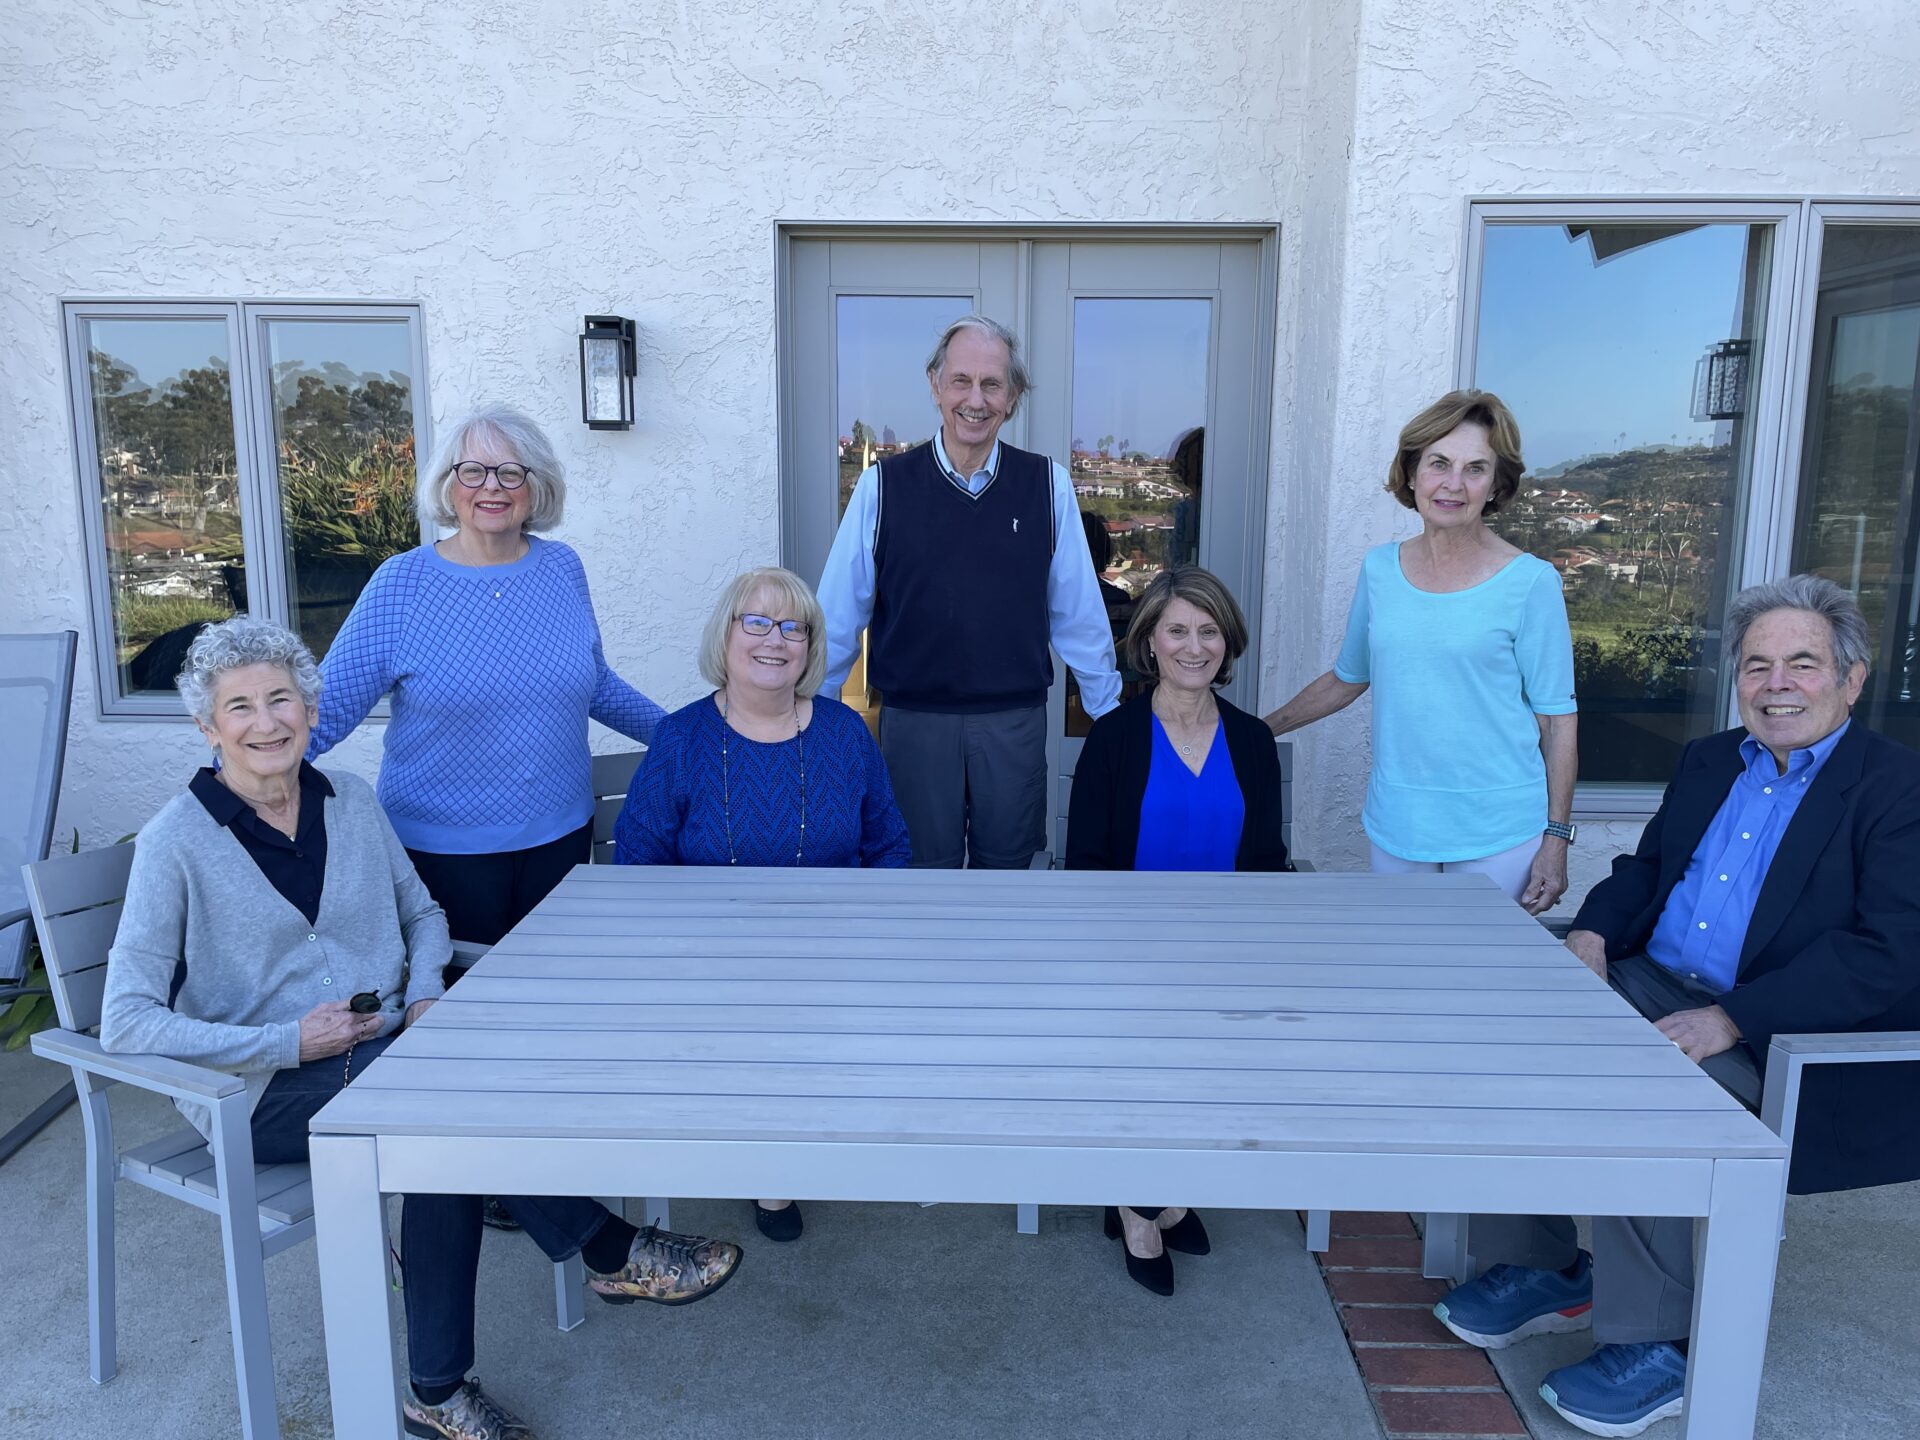 The Solana Beach Community Connections